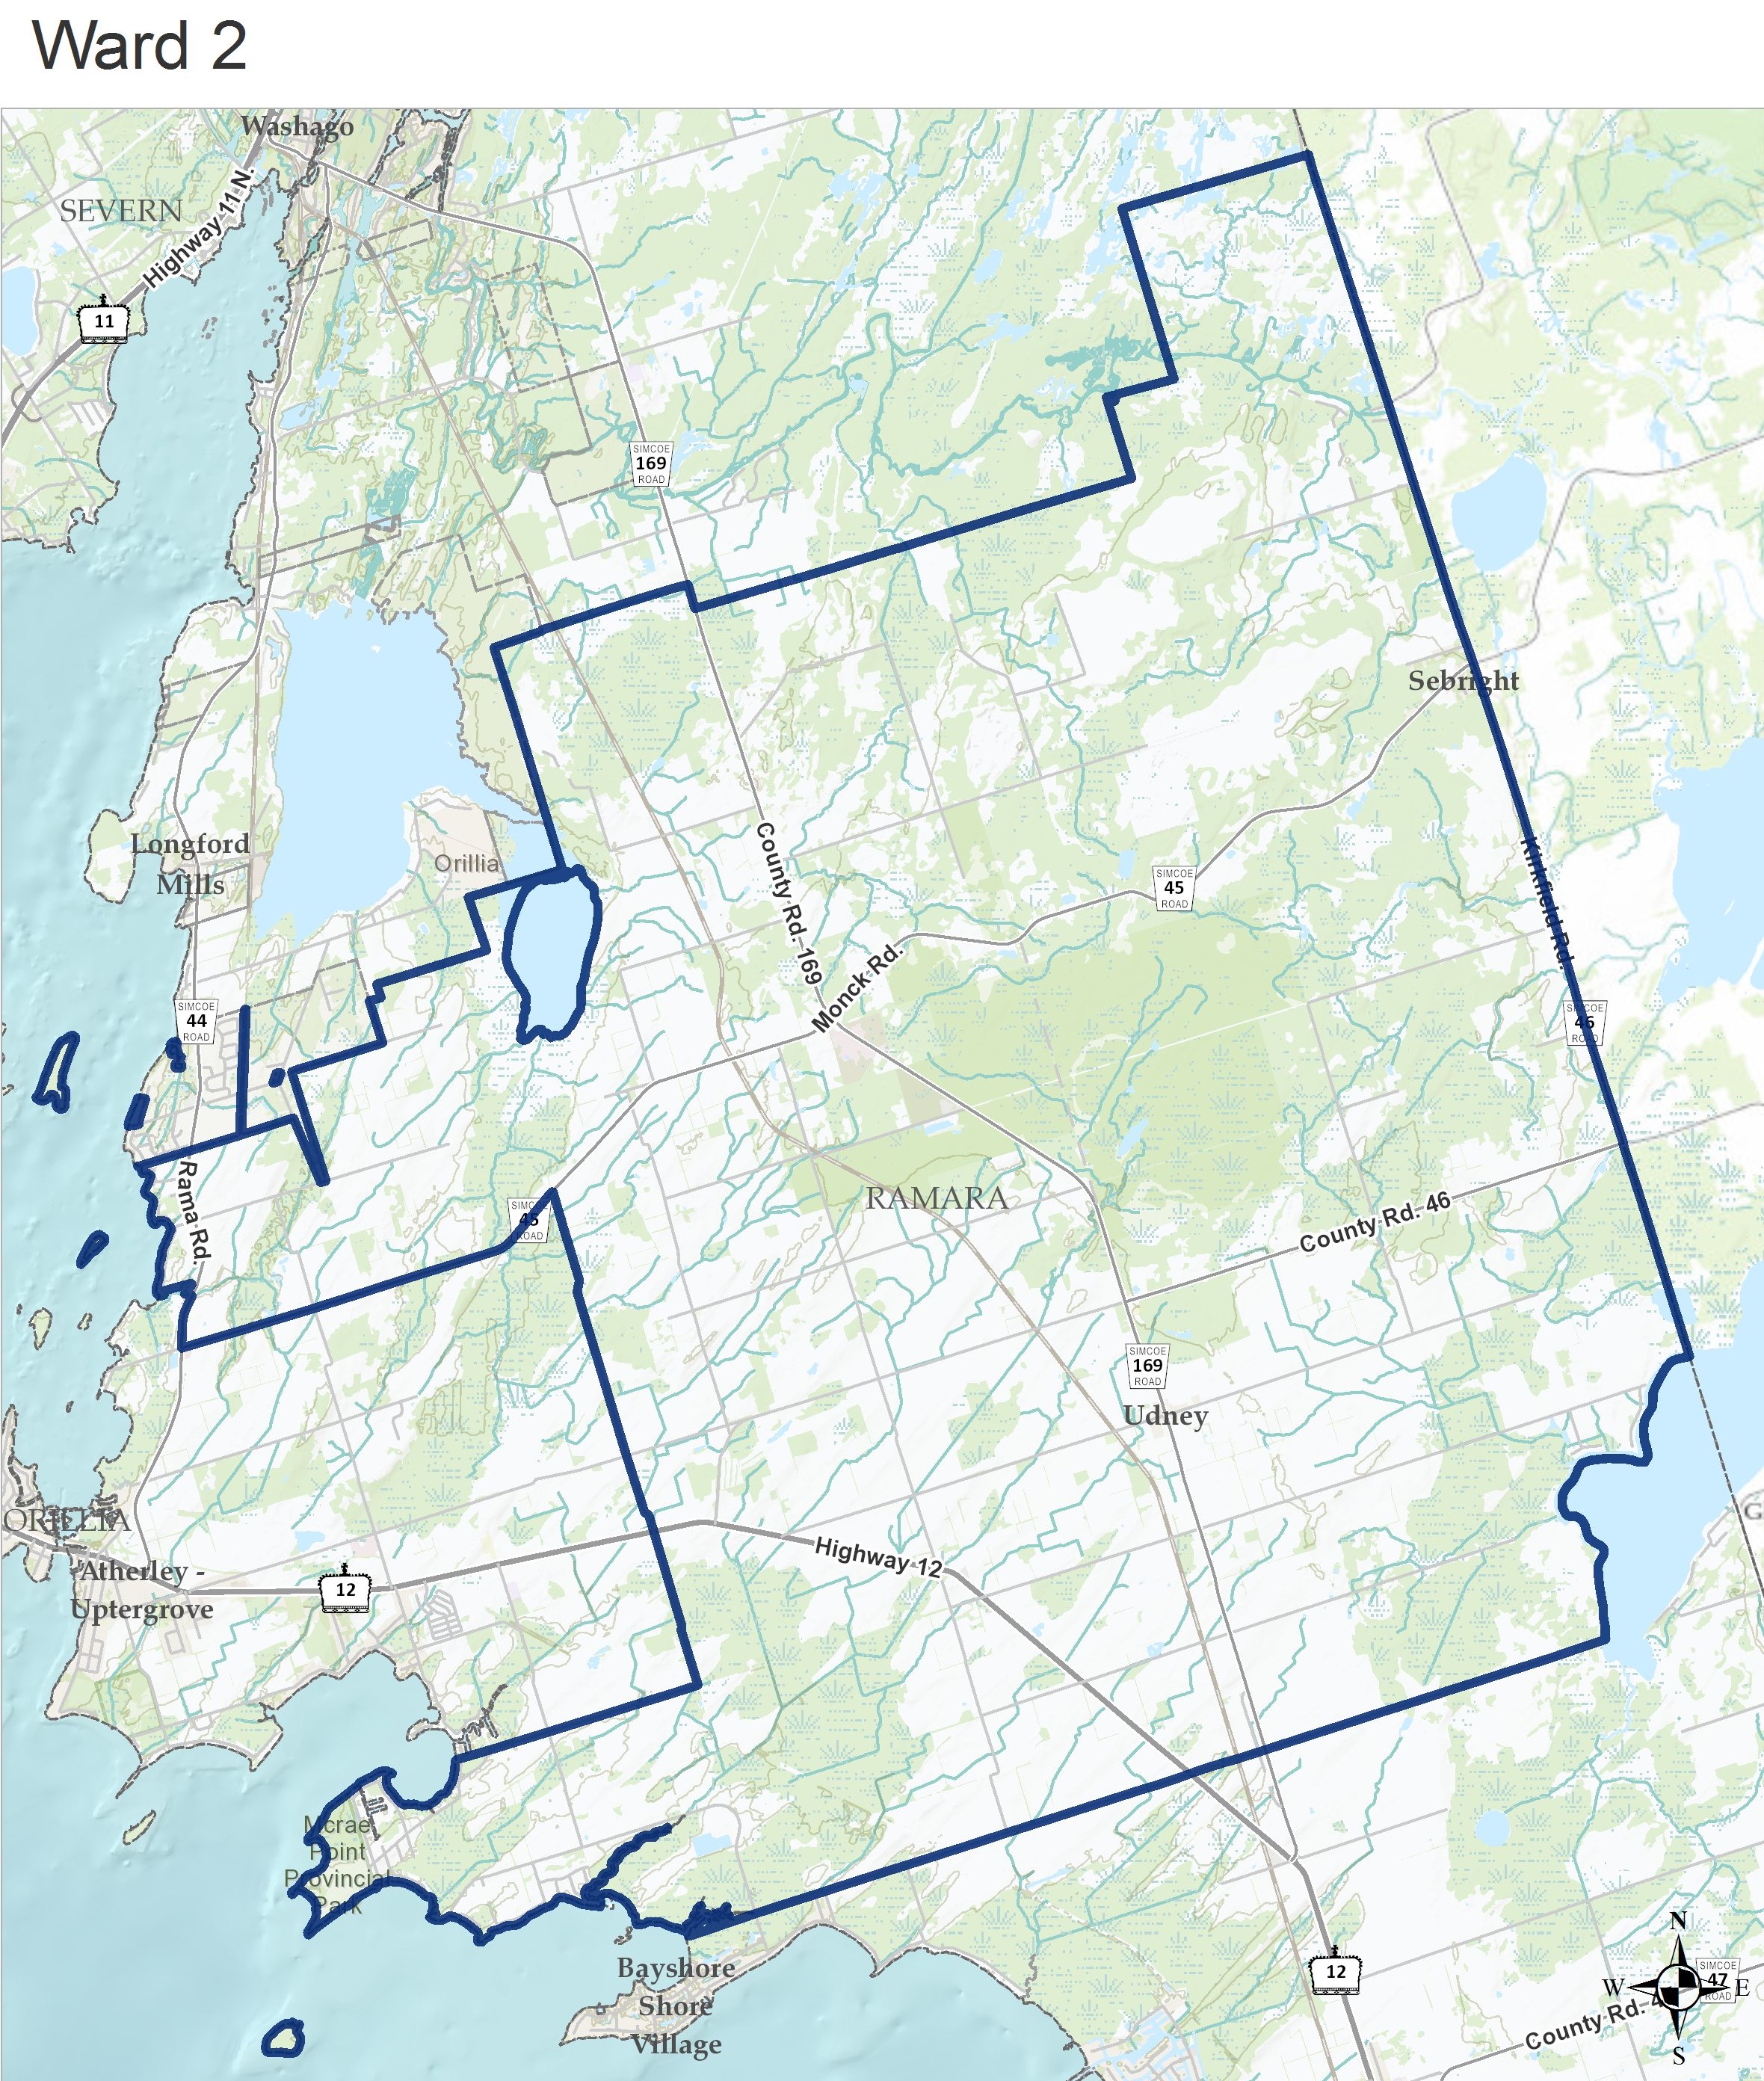 Map showing the area of Ward 2